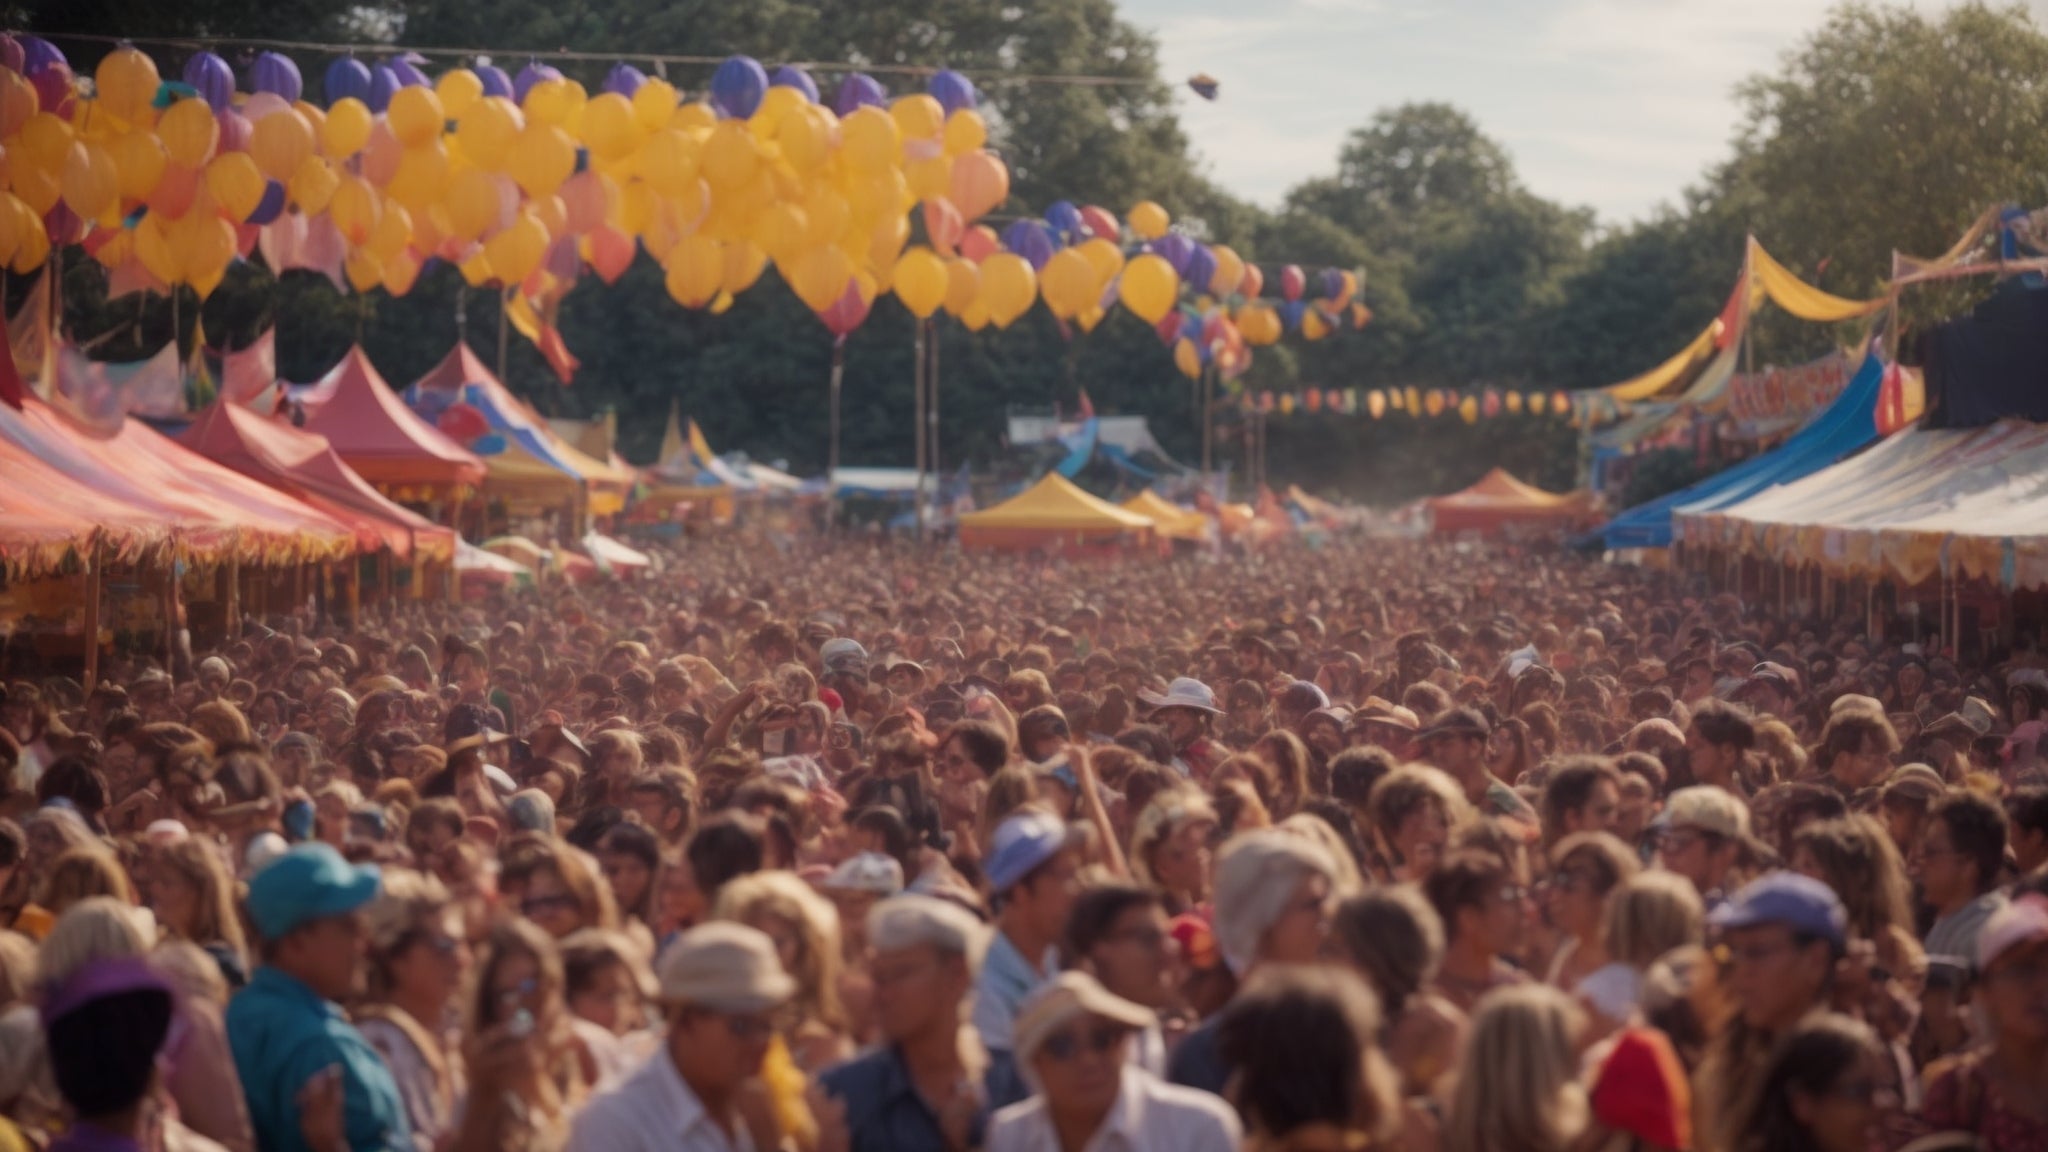 Festival Season Over 40: Tips for Thriving, Not Just Surviving